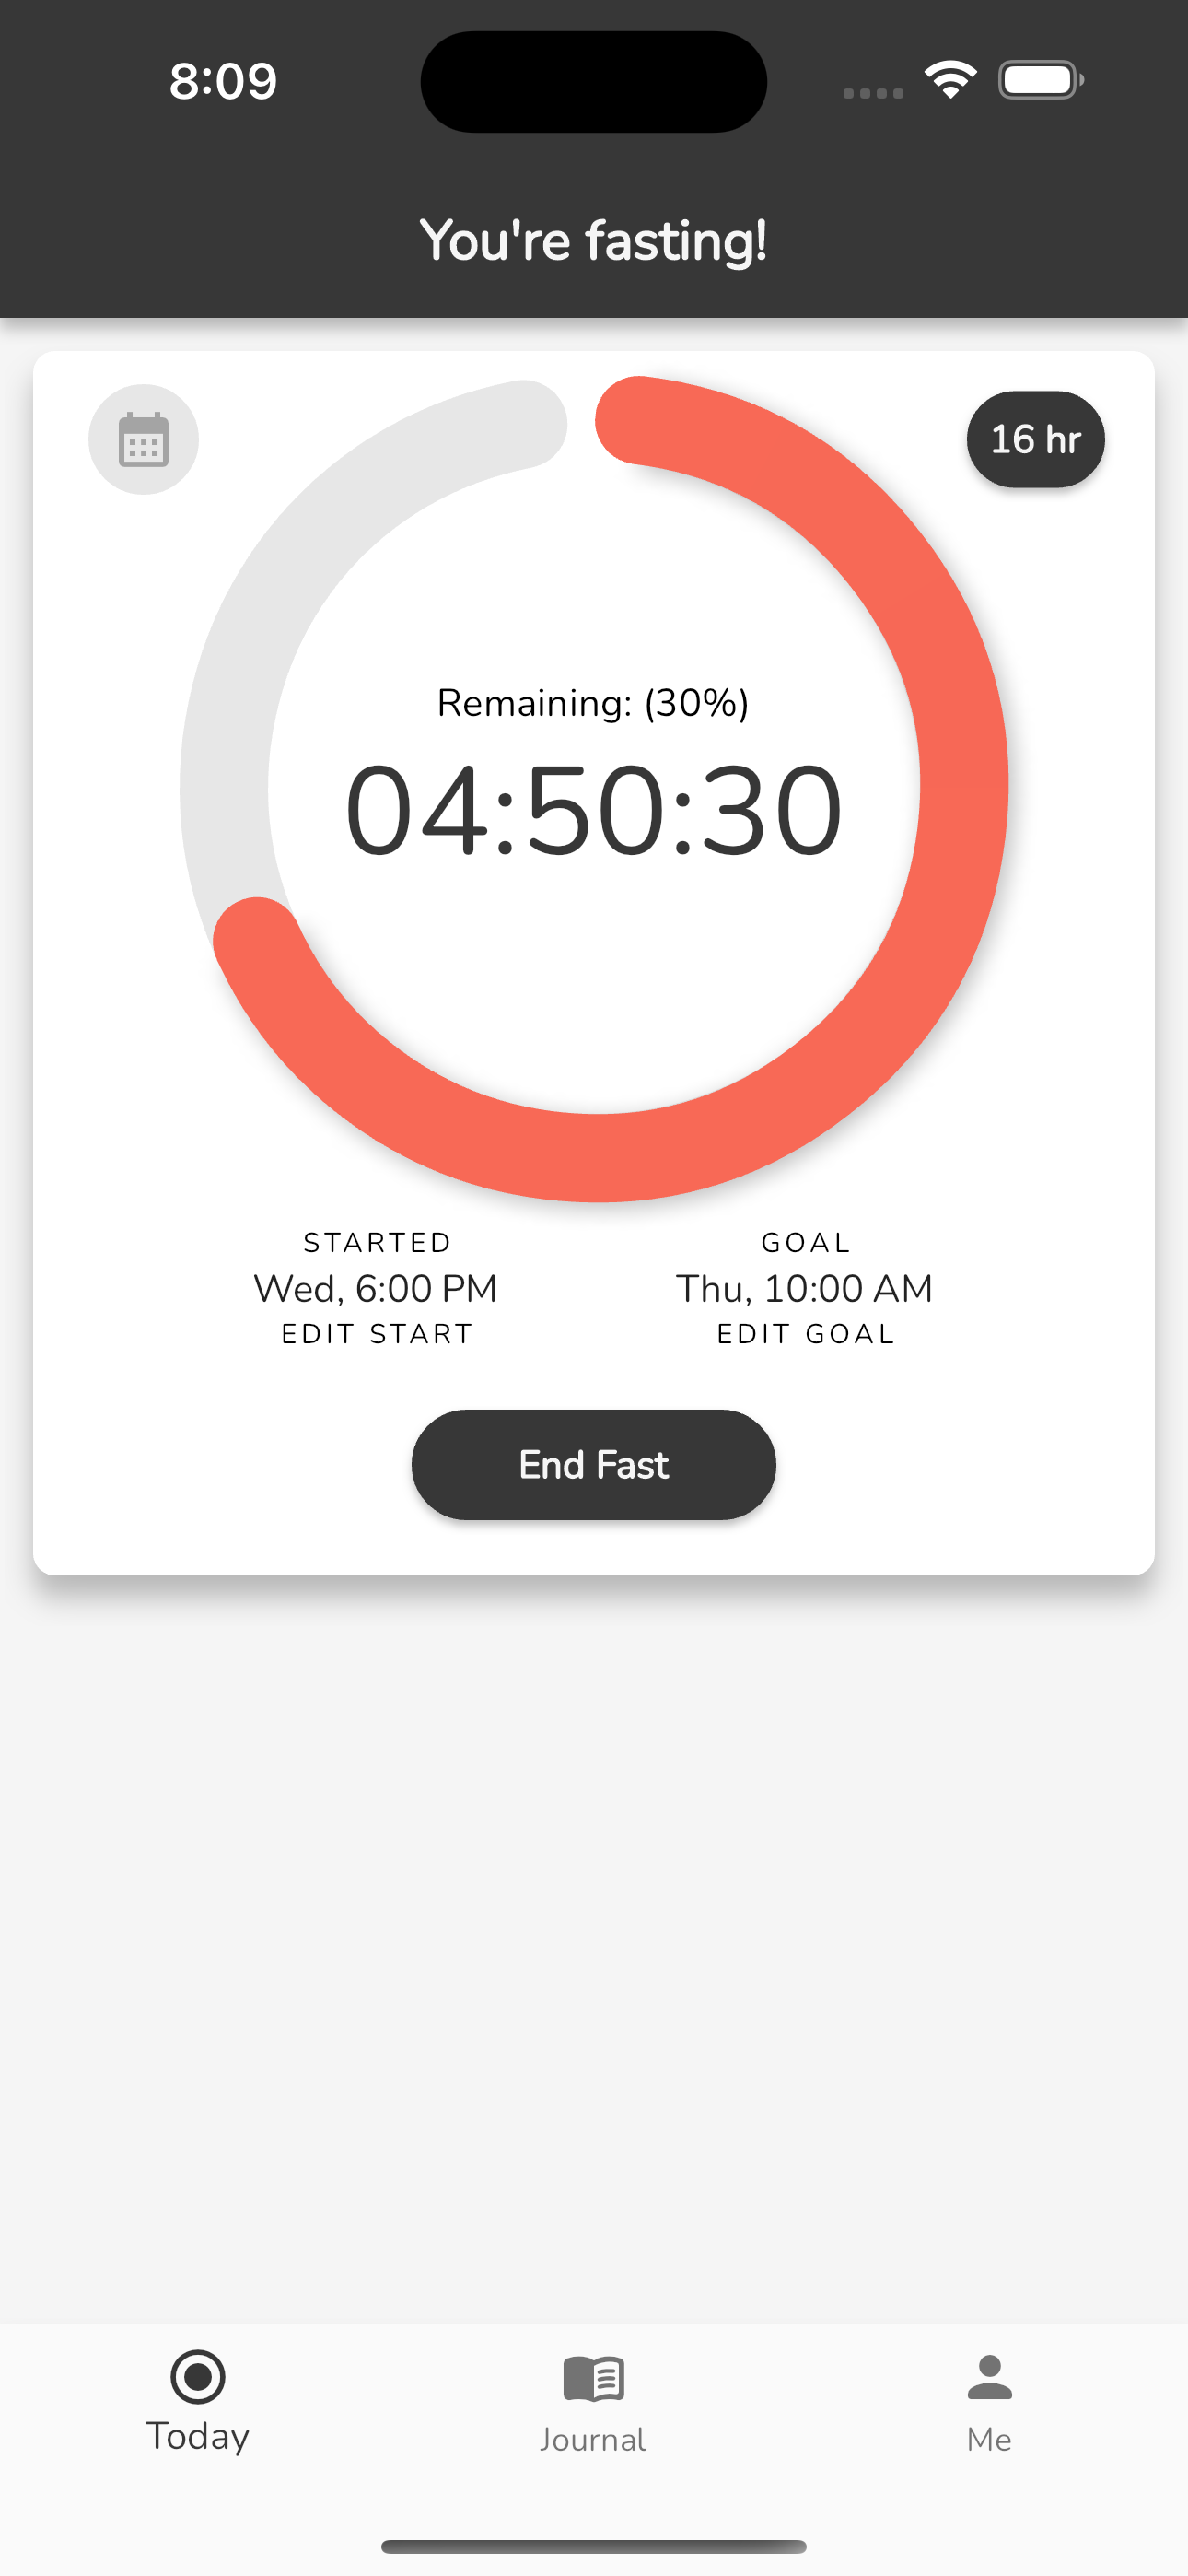 Fastpal timer showing an almost completed fast